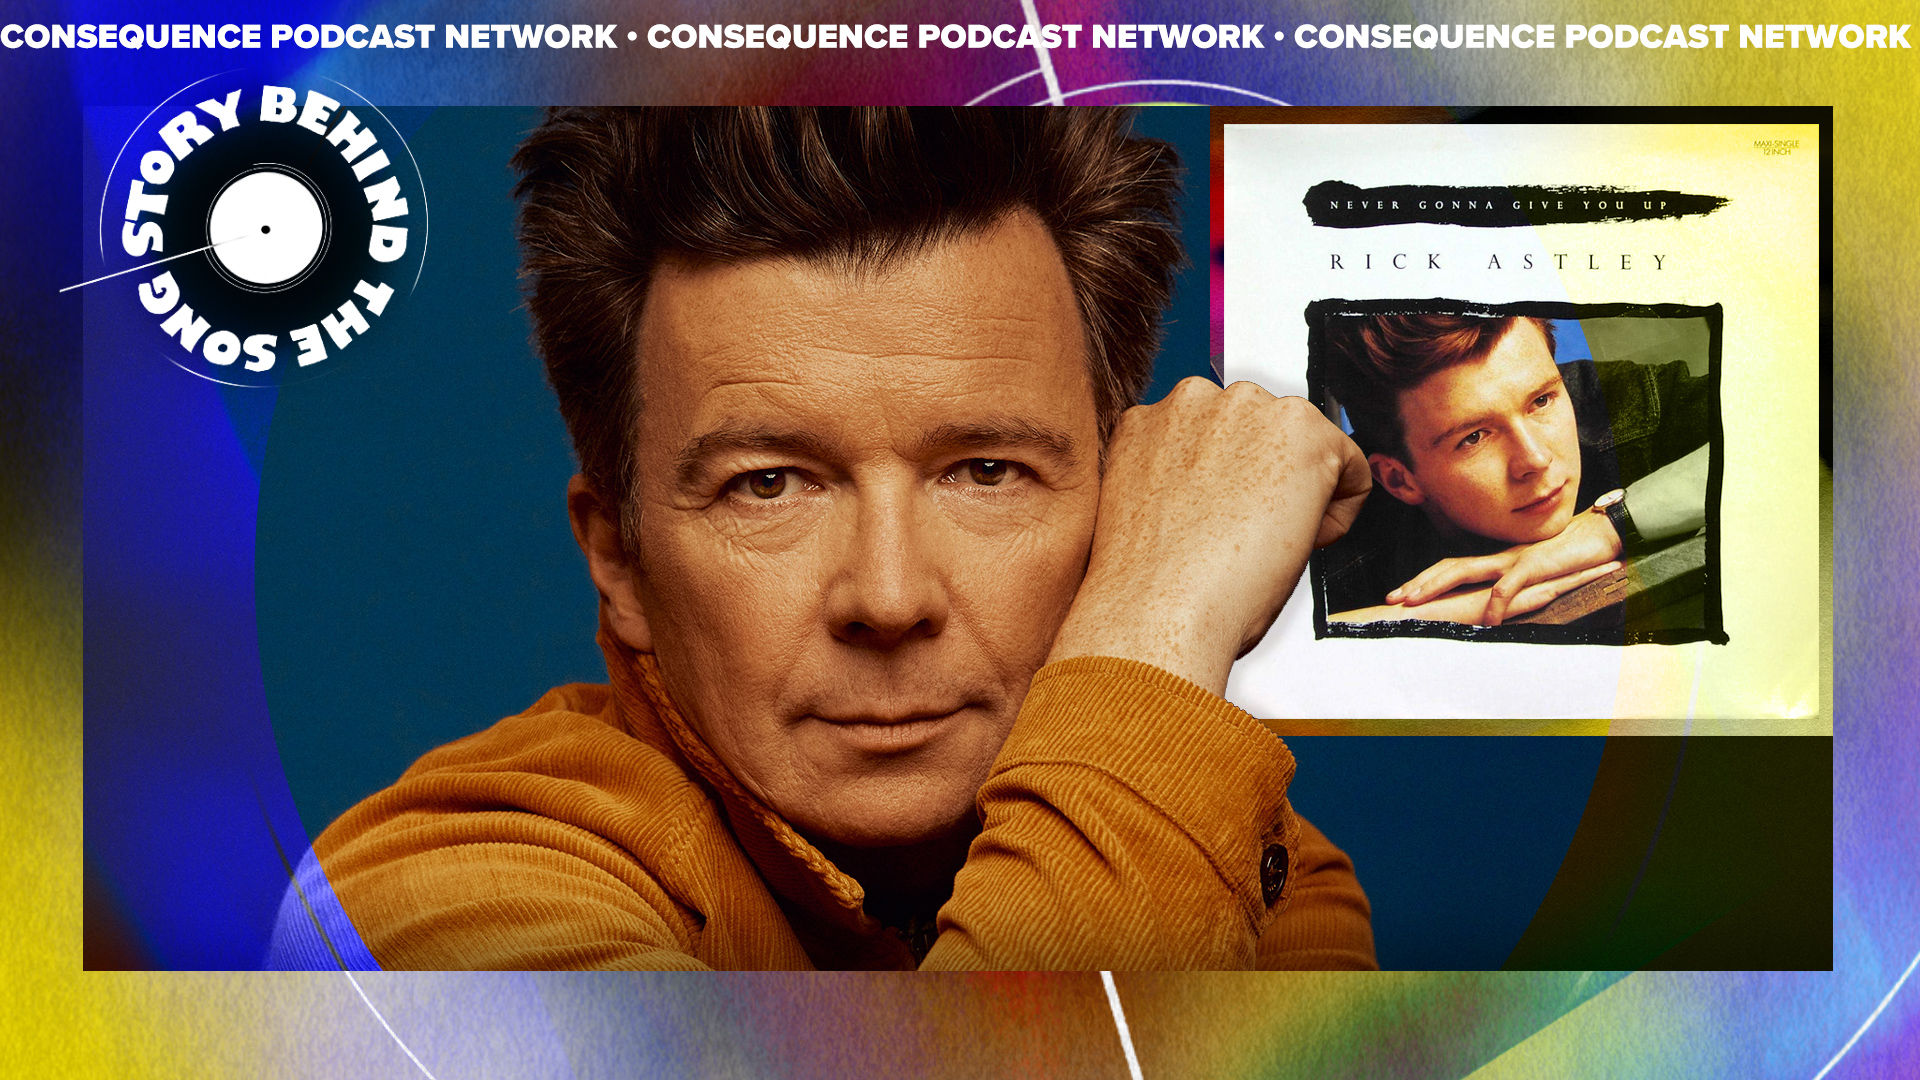 The Story Behind Rick Astley's "Never Gonna Give You Up" Making Him an Internet and Cultural Phenomenon